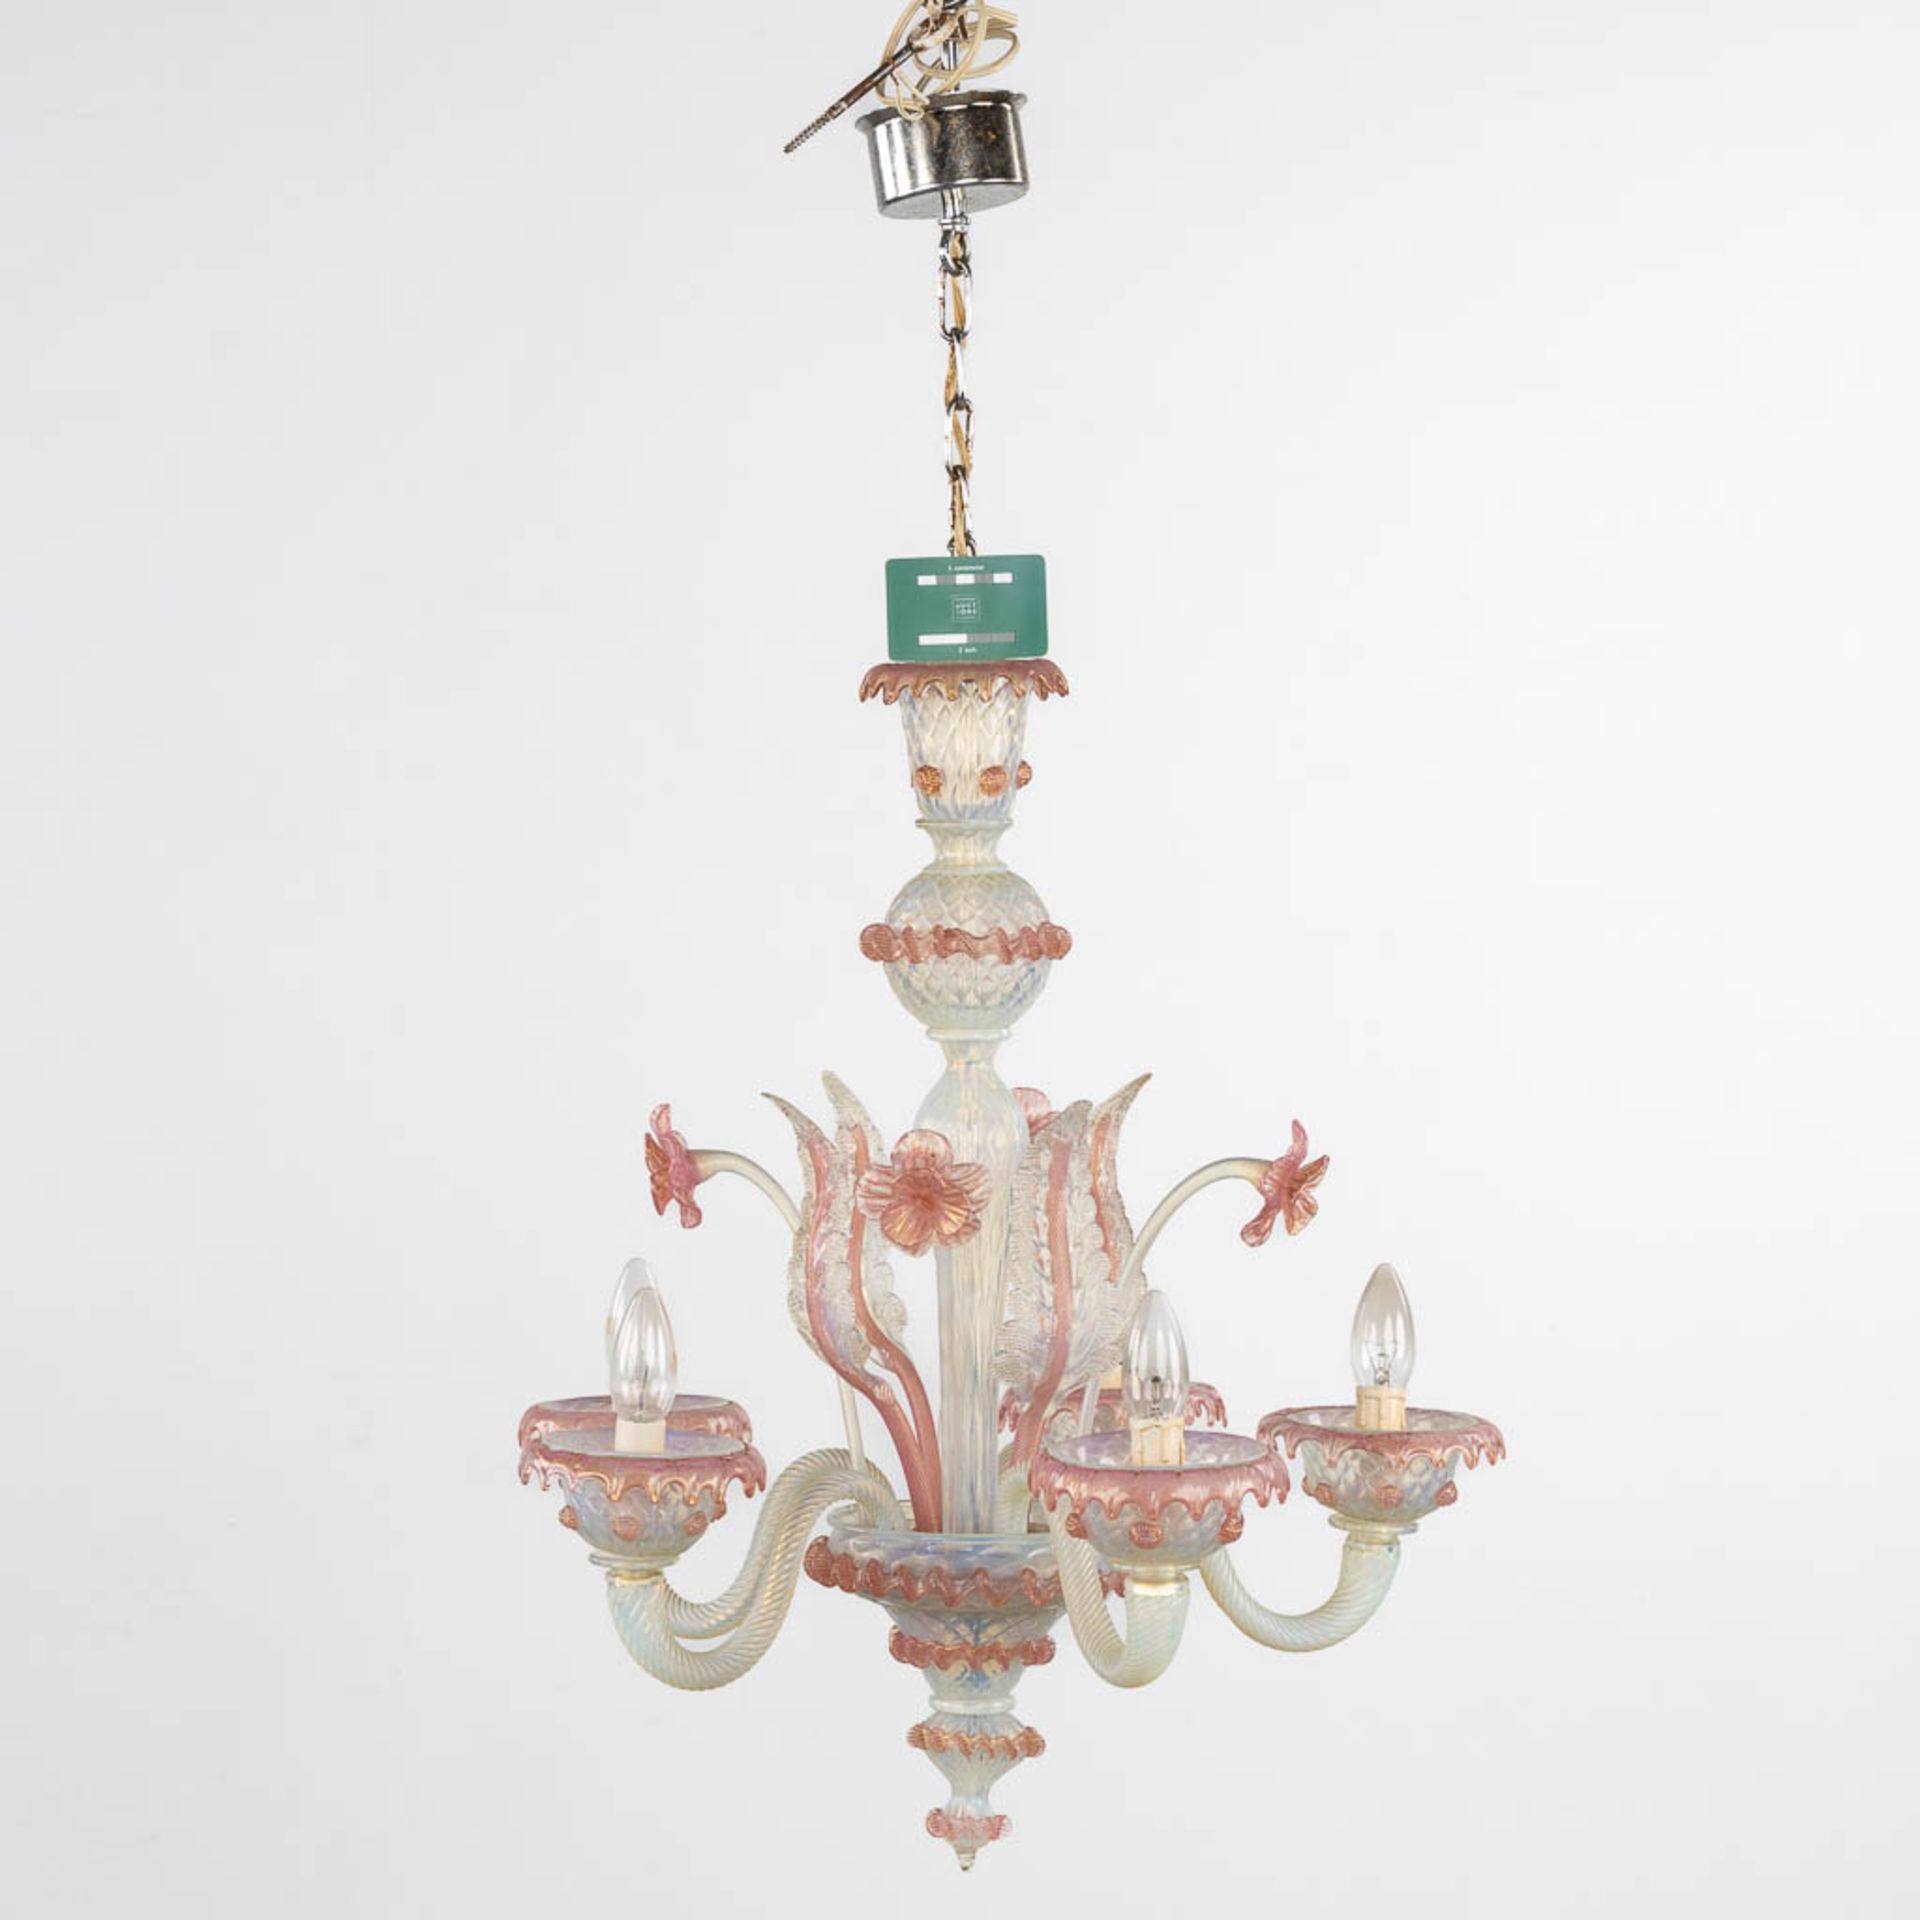 A decorative Venetian glass chandelier, red and white glass. 20th C. (H:70 x D:54 cm) - Image 2 of 12